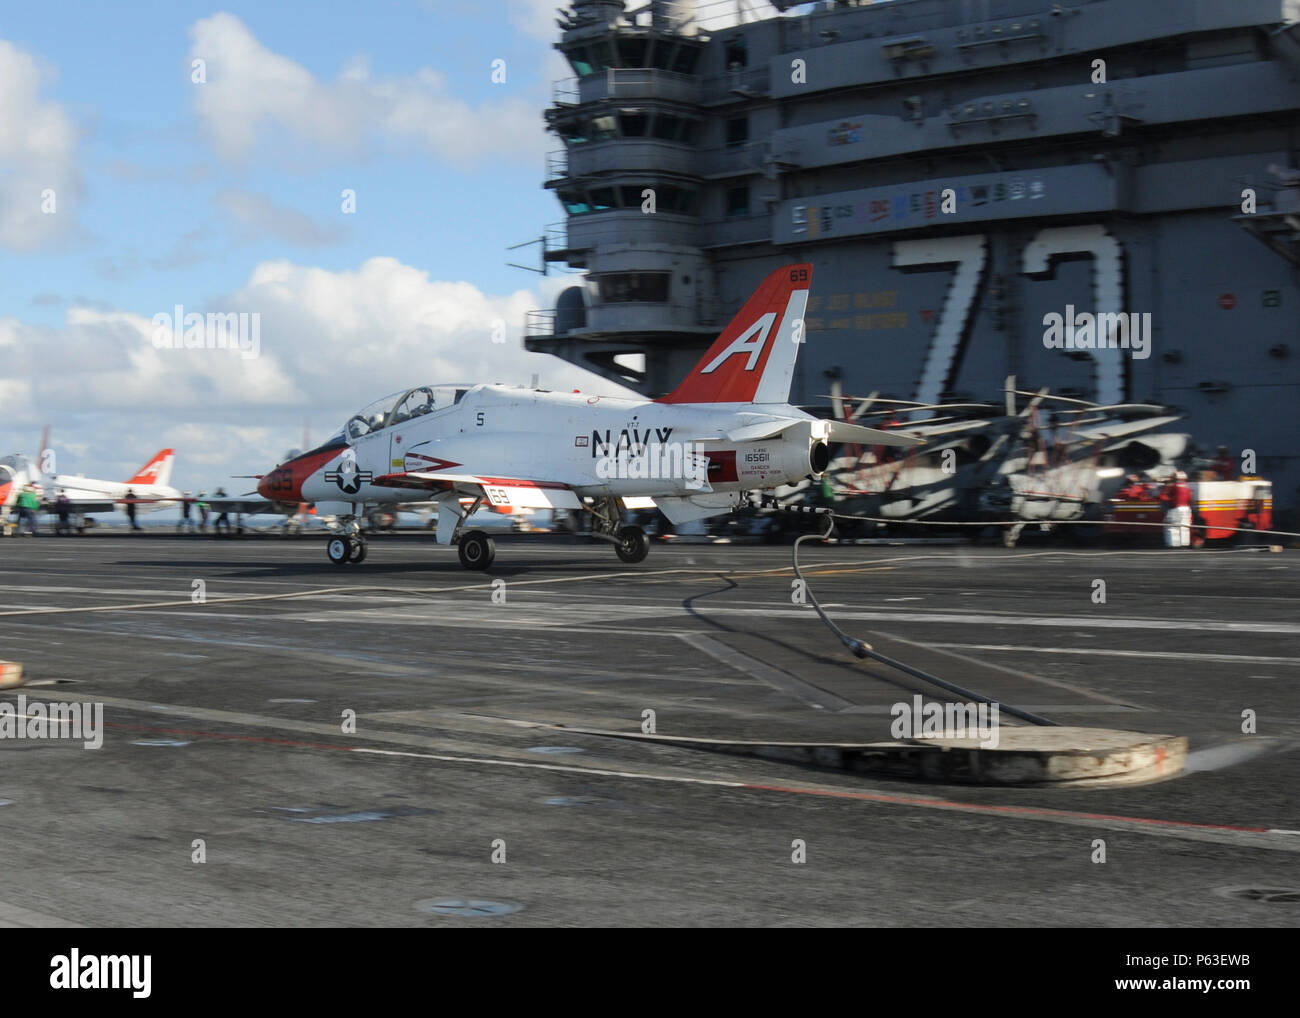 160423-N-GN619-236 ATLANTIC OCEAN (April 23, 2016) A T-45C Goshawk, assigned to Training Air Wing (TW) 1, lands on the flight deck of the aircraft carrier USS George Washington (CVN 73). Washington, homeported in Norfolk, is underway conducting carrier qualifications in the Atlantic Ocean. (U.S. Navy photo by Mass Communication Specialist 3rd Class Kris R. Lindstrom/Released) Stock Photo